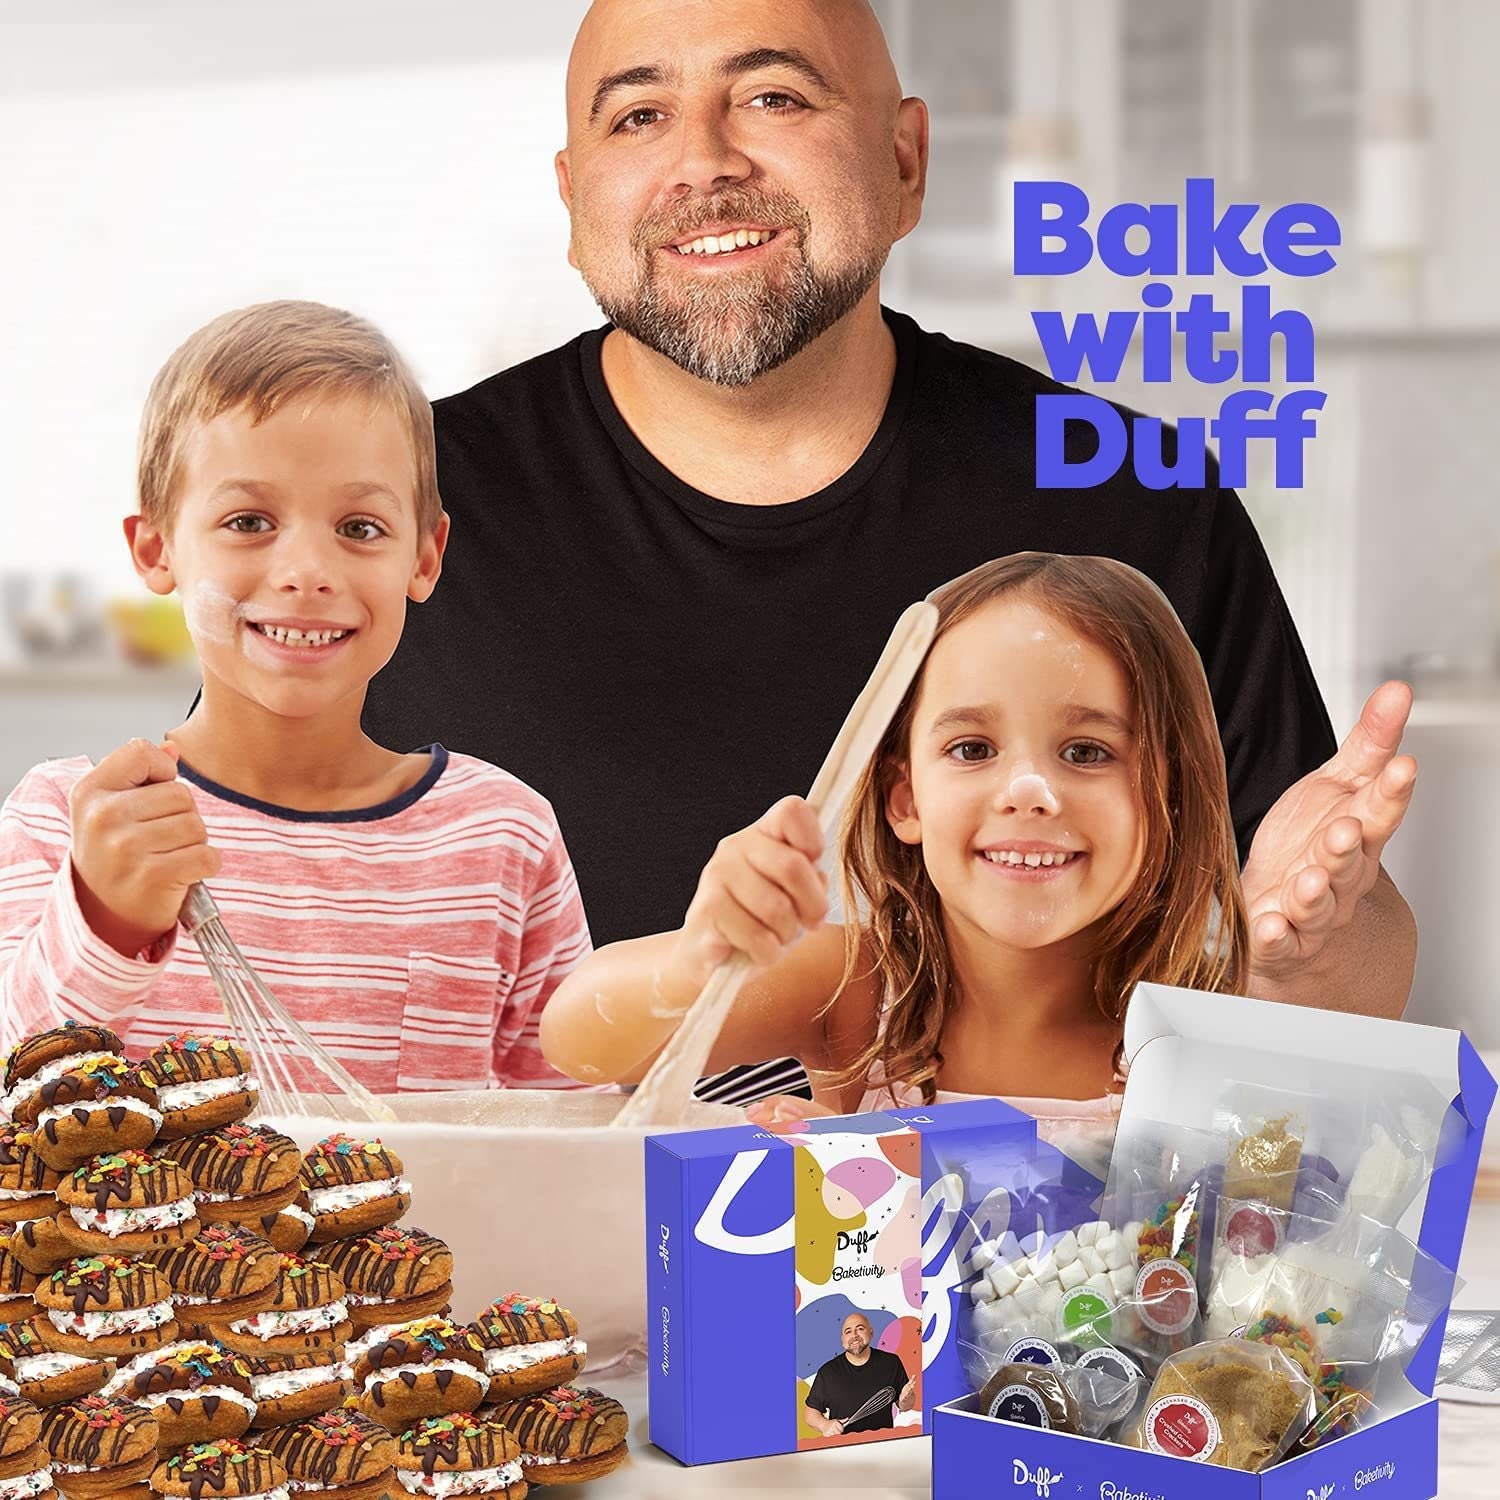 Duff Goldman DIY Baking Set for Kids by Baketivity - Bake Delicious S’mores Sandwich Cookies with Premeasured Ingredients Best Family Fun Activity